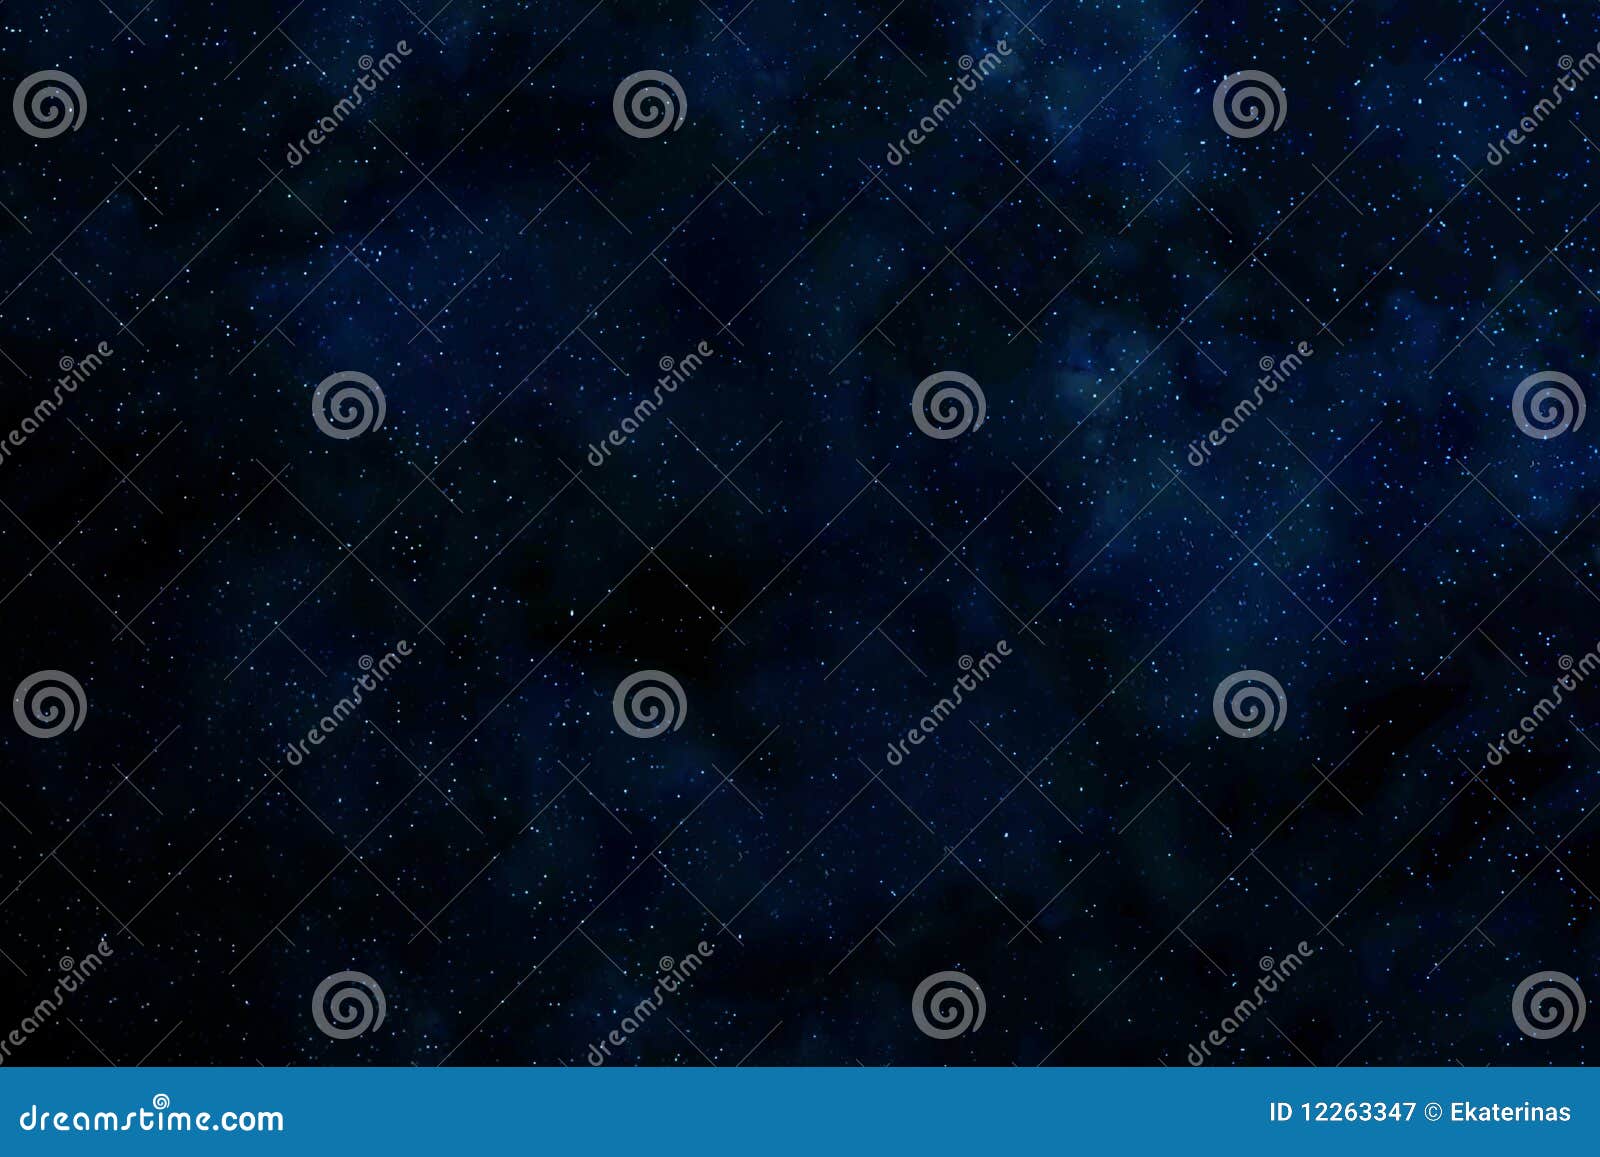 Space background stock image. Image of astrophoto, astronomy - 12263347